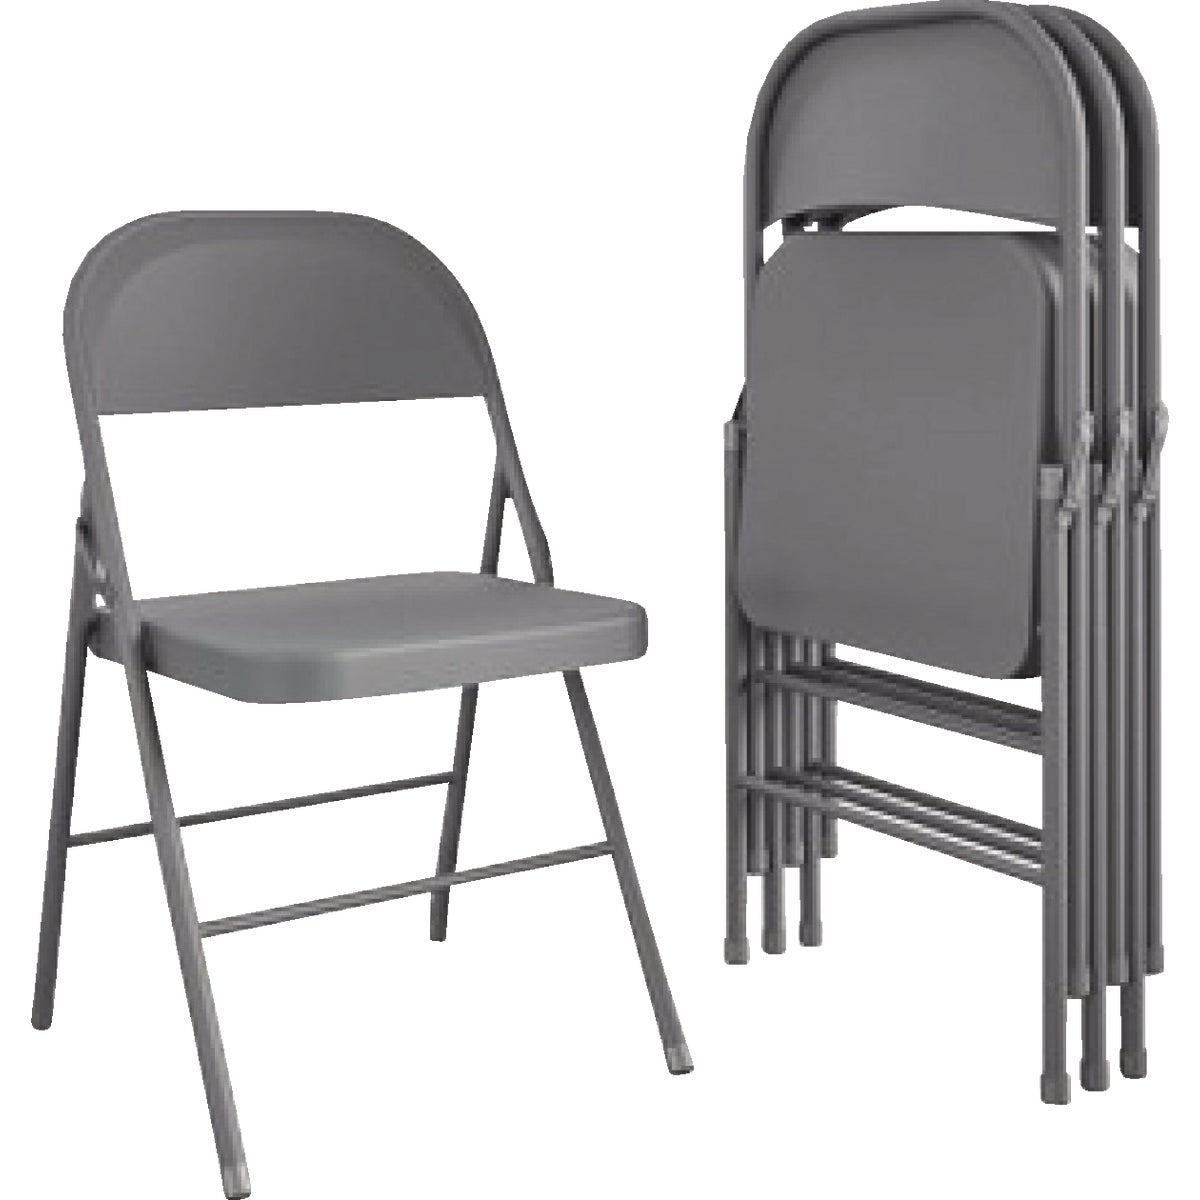 Cosco Gray All Steel Folding Chair (4-Pack)